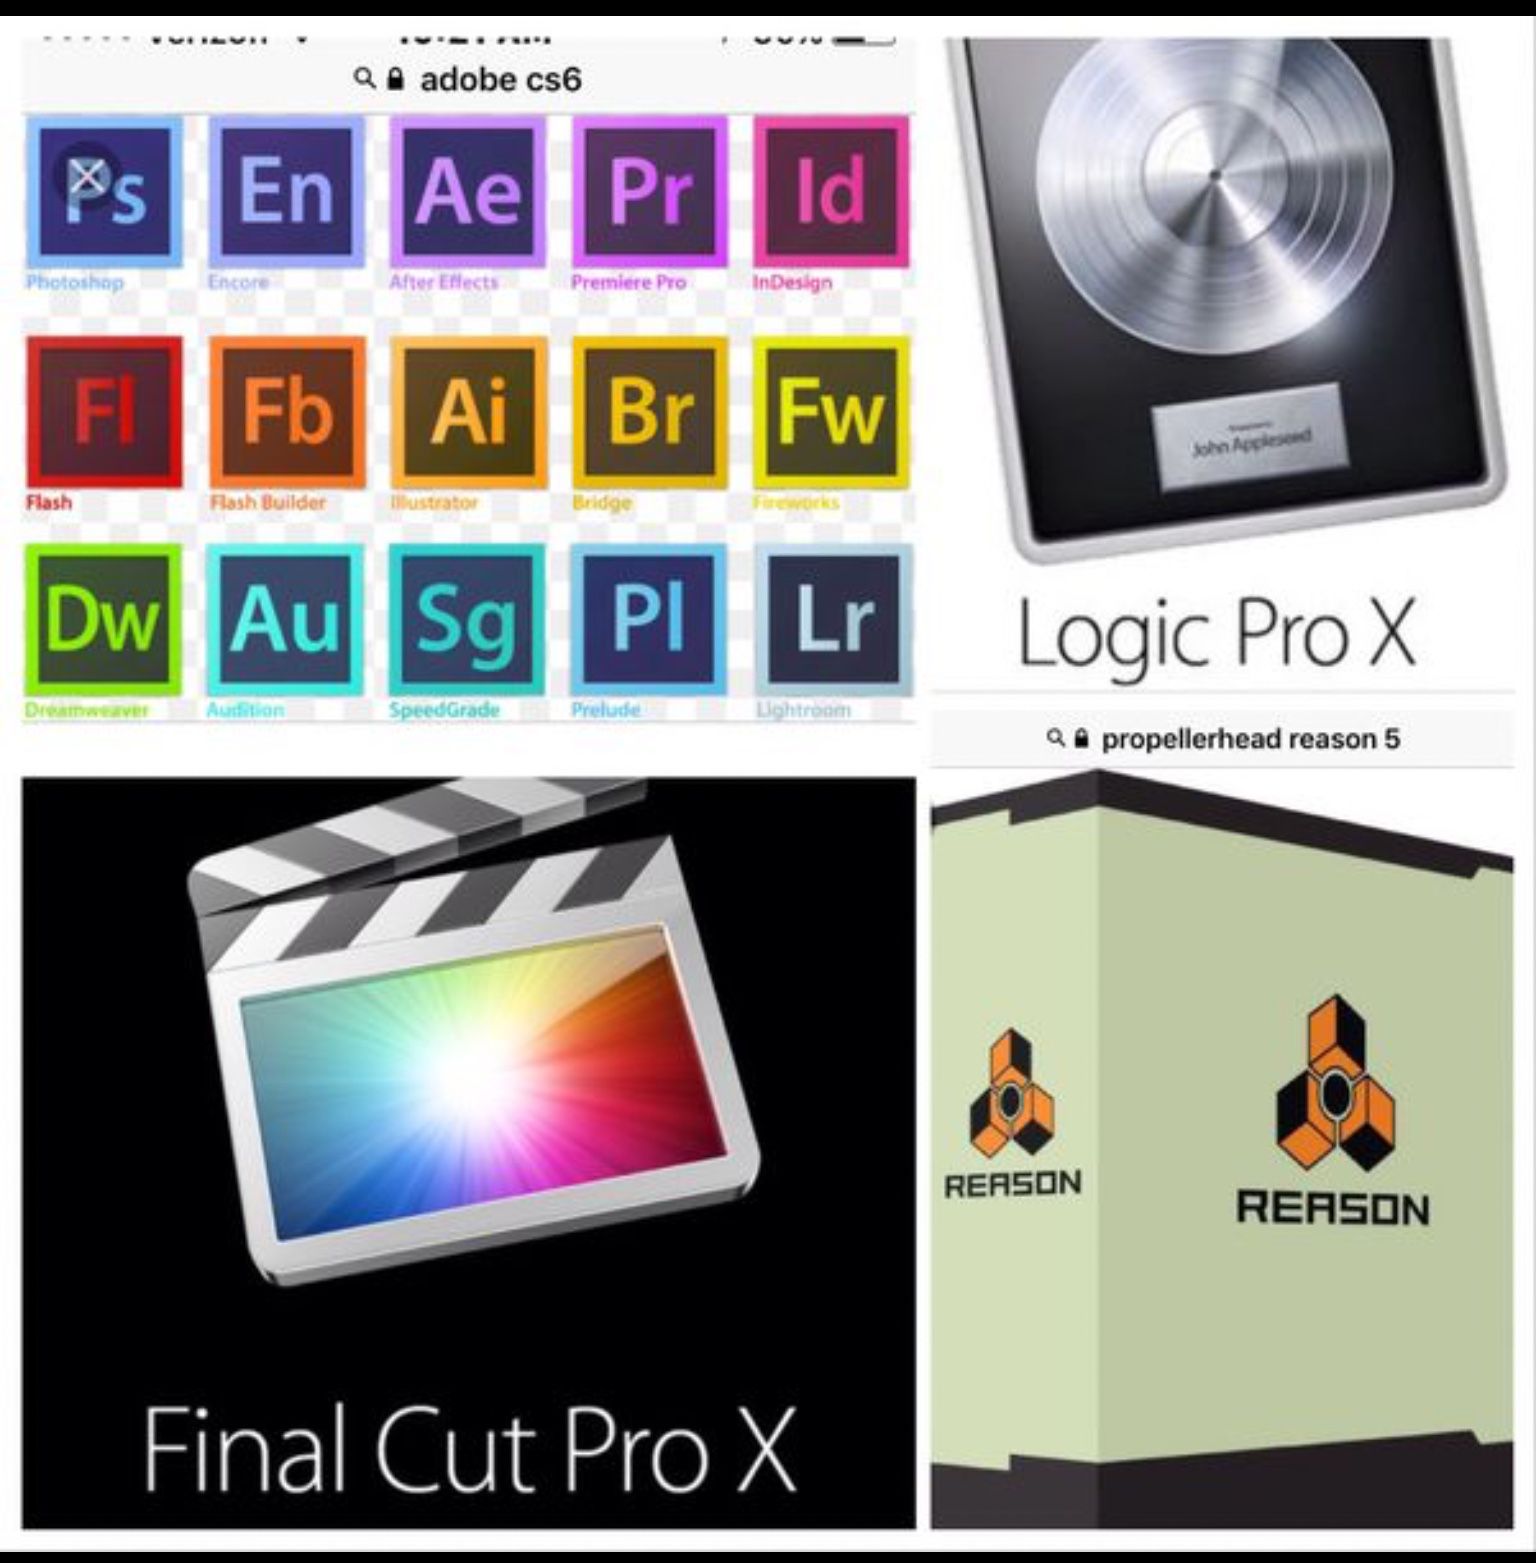 Adobe CS6, CC 2020 Master collection, Reason 5, for Mac/PC, Final Cut X, Logic Pro X 10.2, for Mac, OFFICE 2019, & more